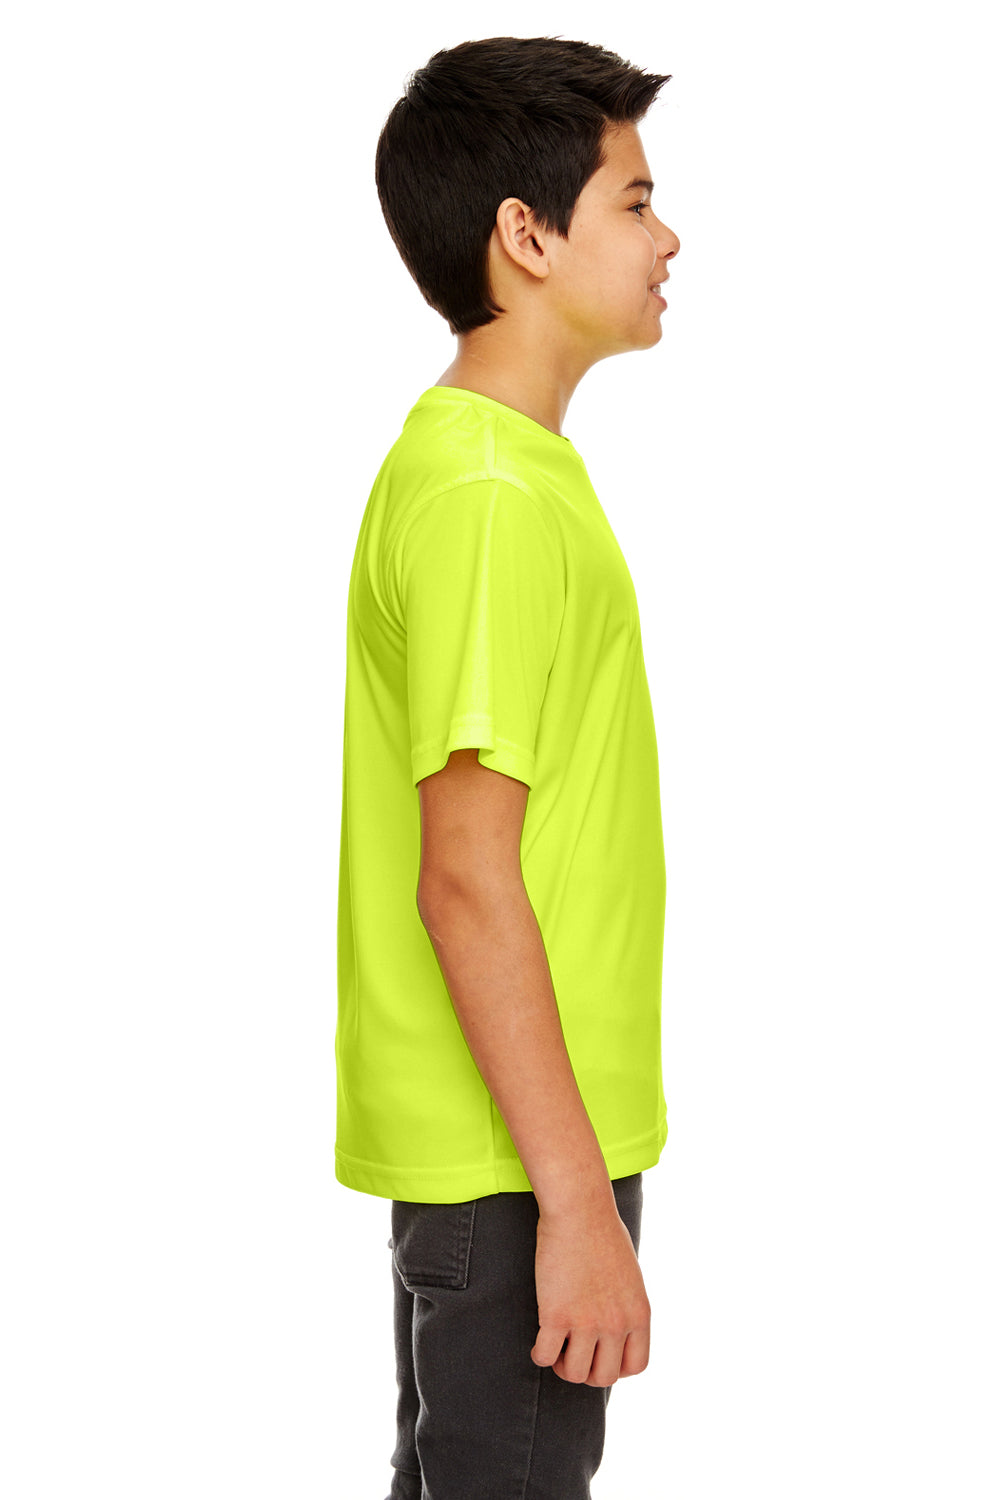 UltraClub 8420Y Youth Cool & Dry Performance Moisture Wicking Short Sleeve Crewneck T-Shirt Bright Yellow Side